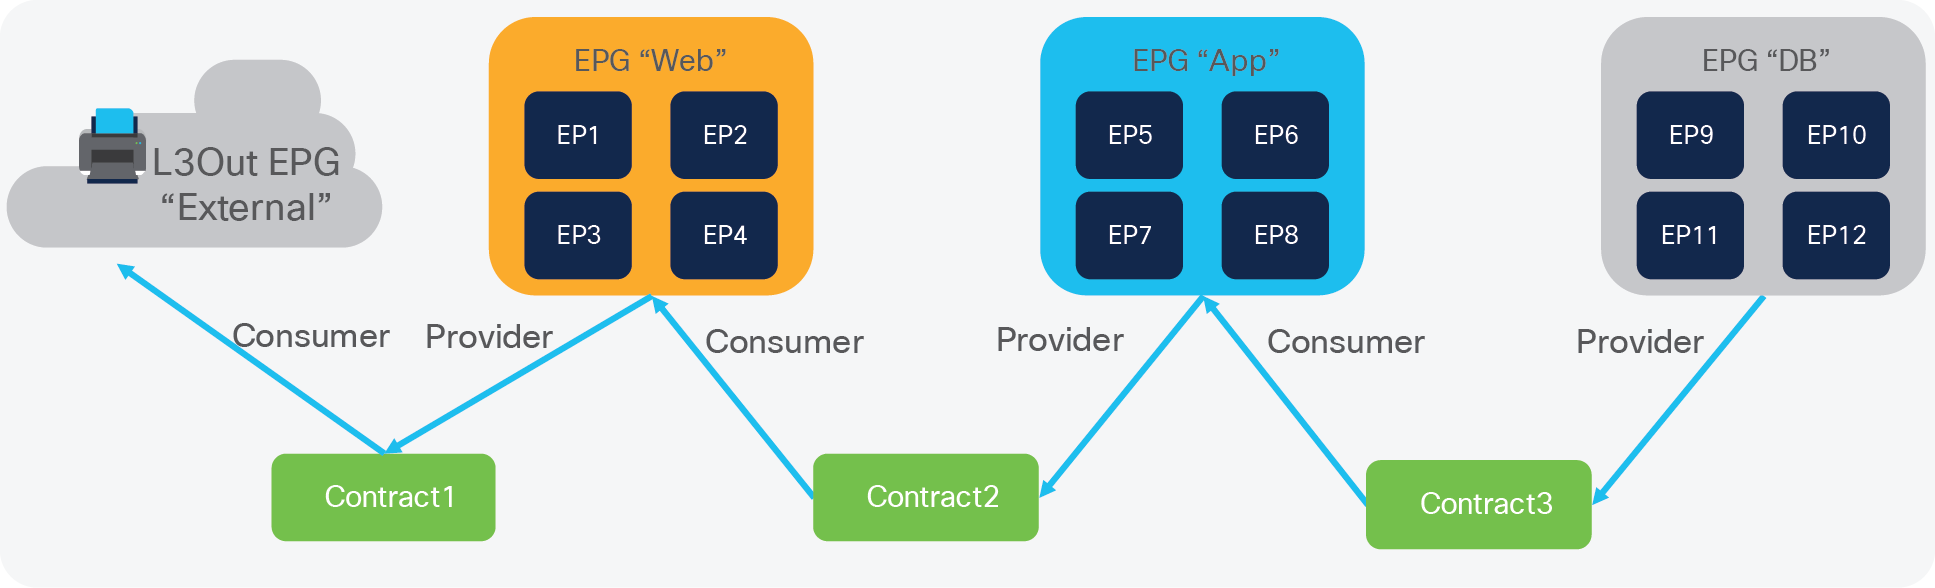 EPG and contracts